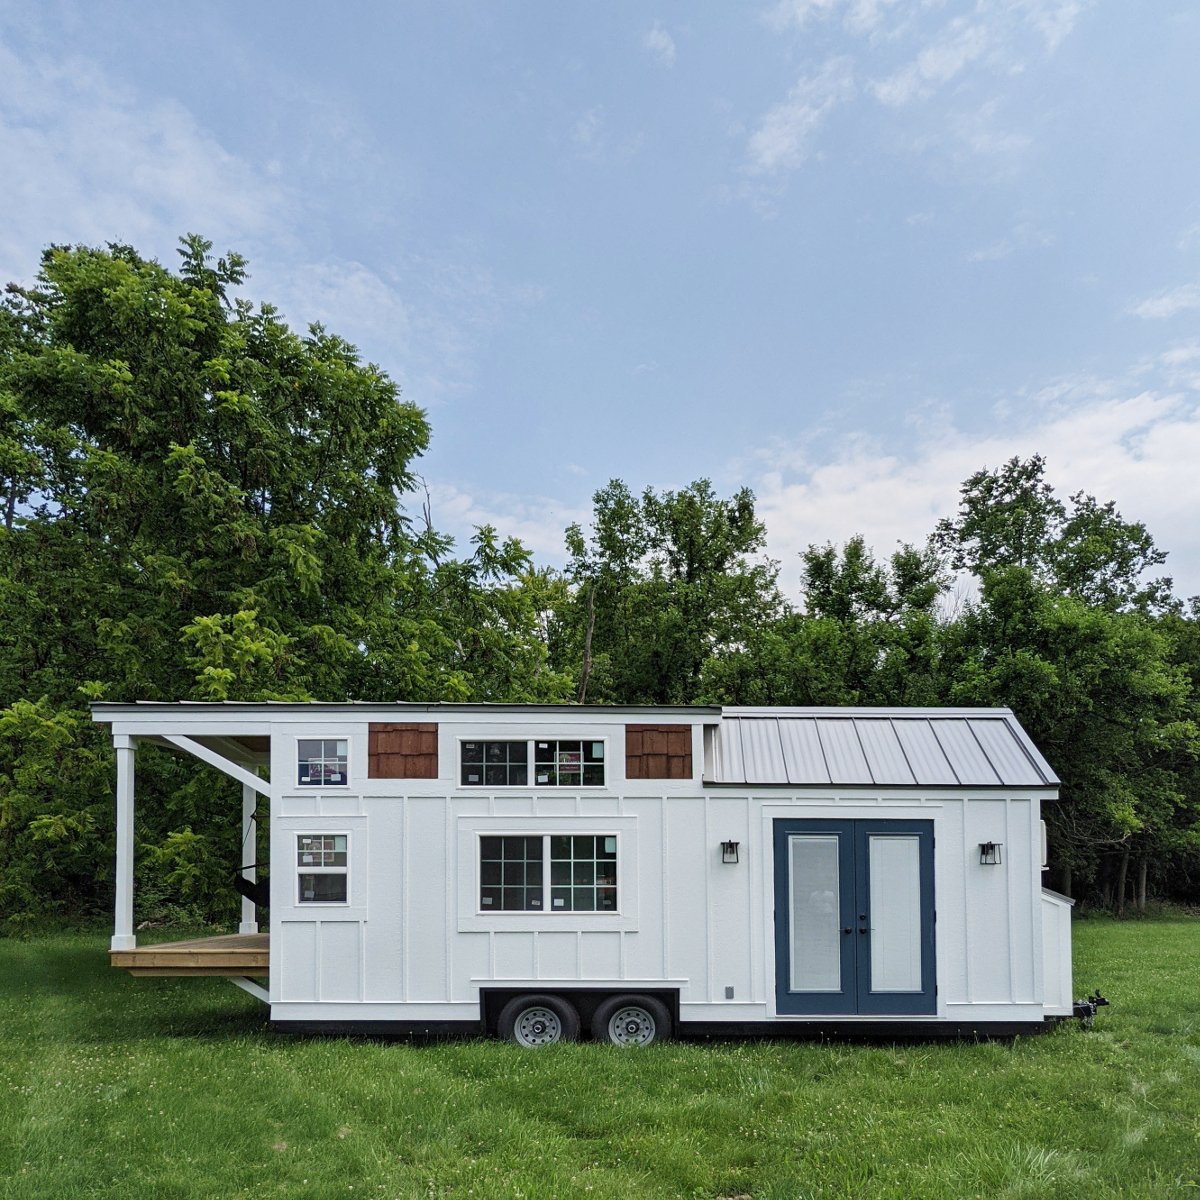 Tiny Houses for Sale: Where to Find the Best Deals Online